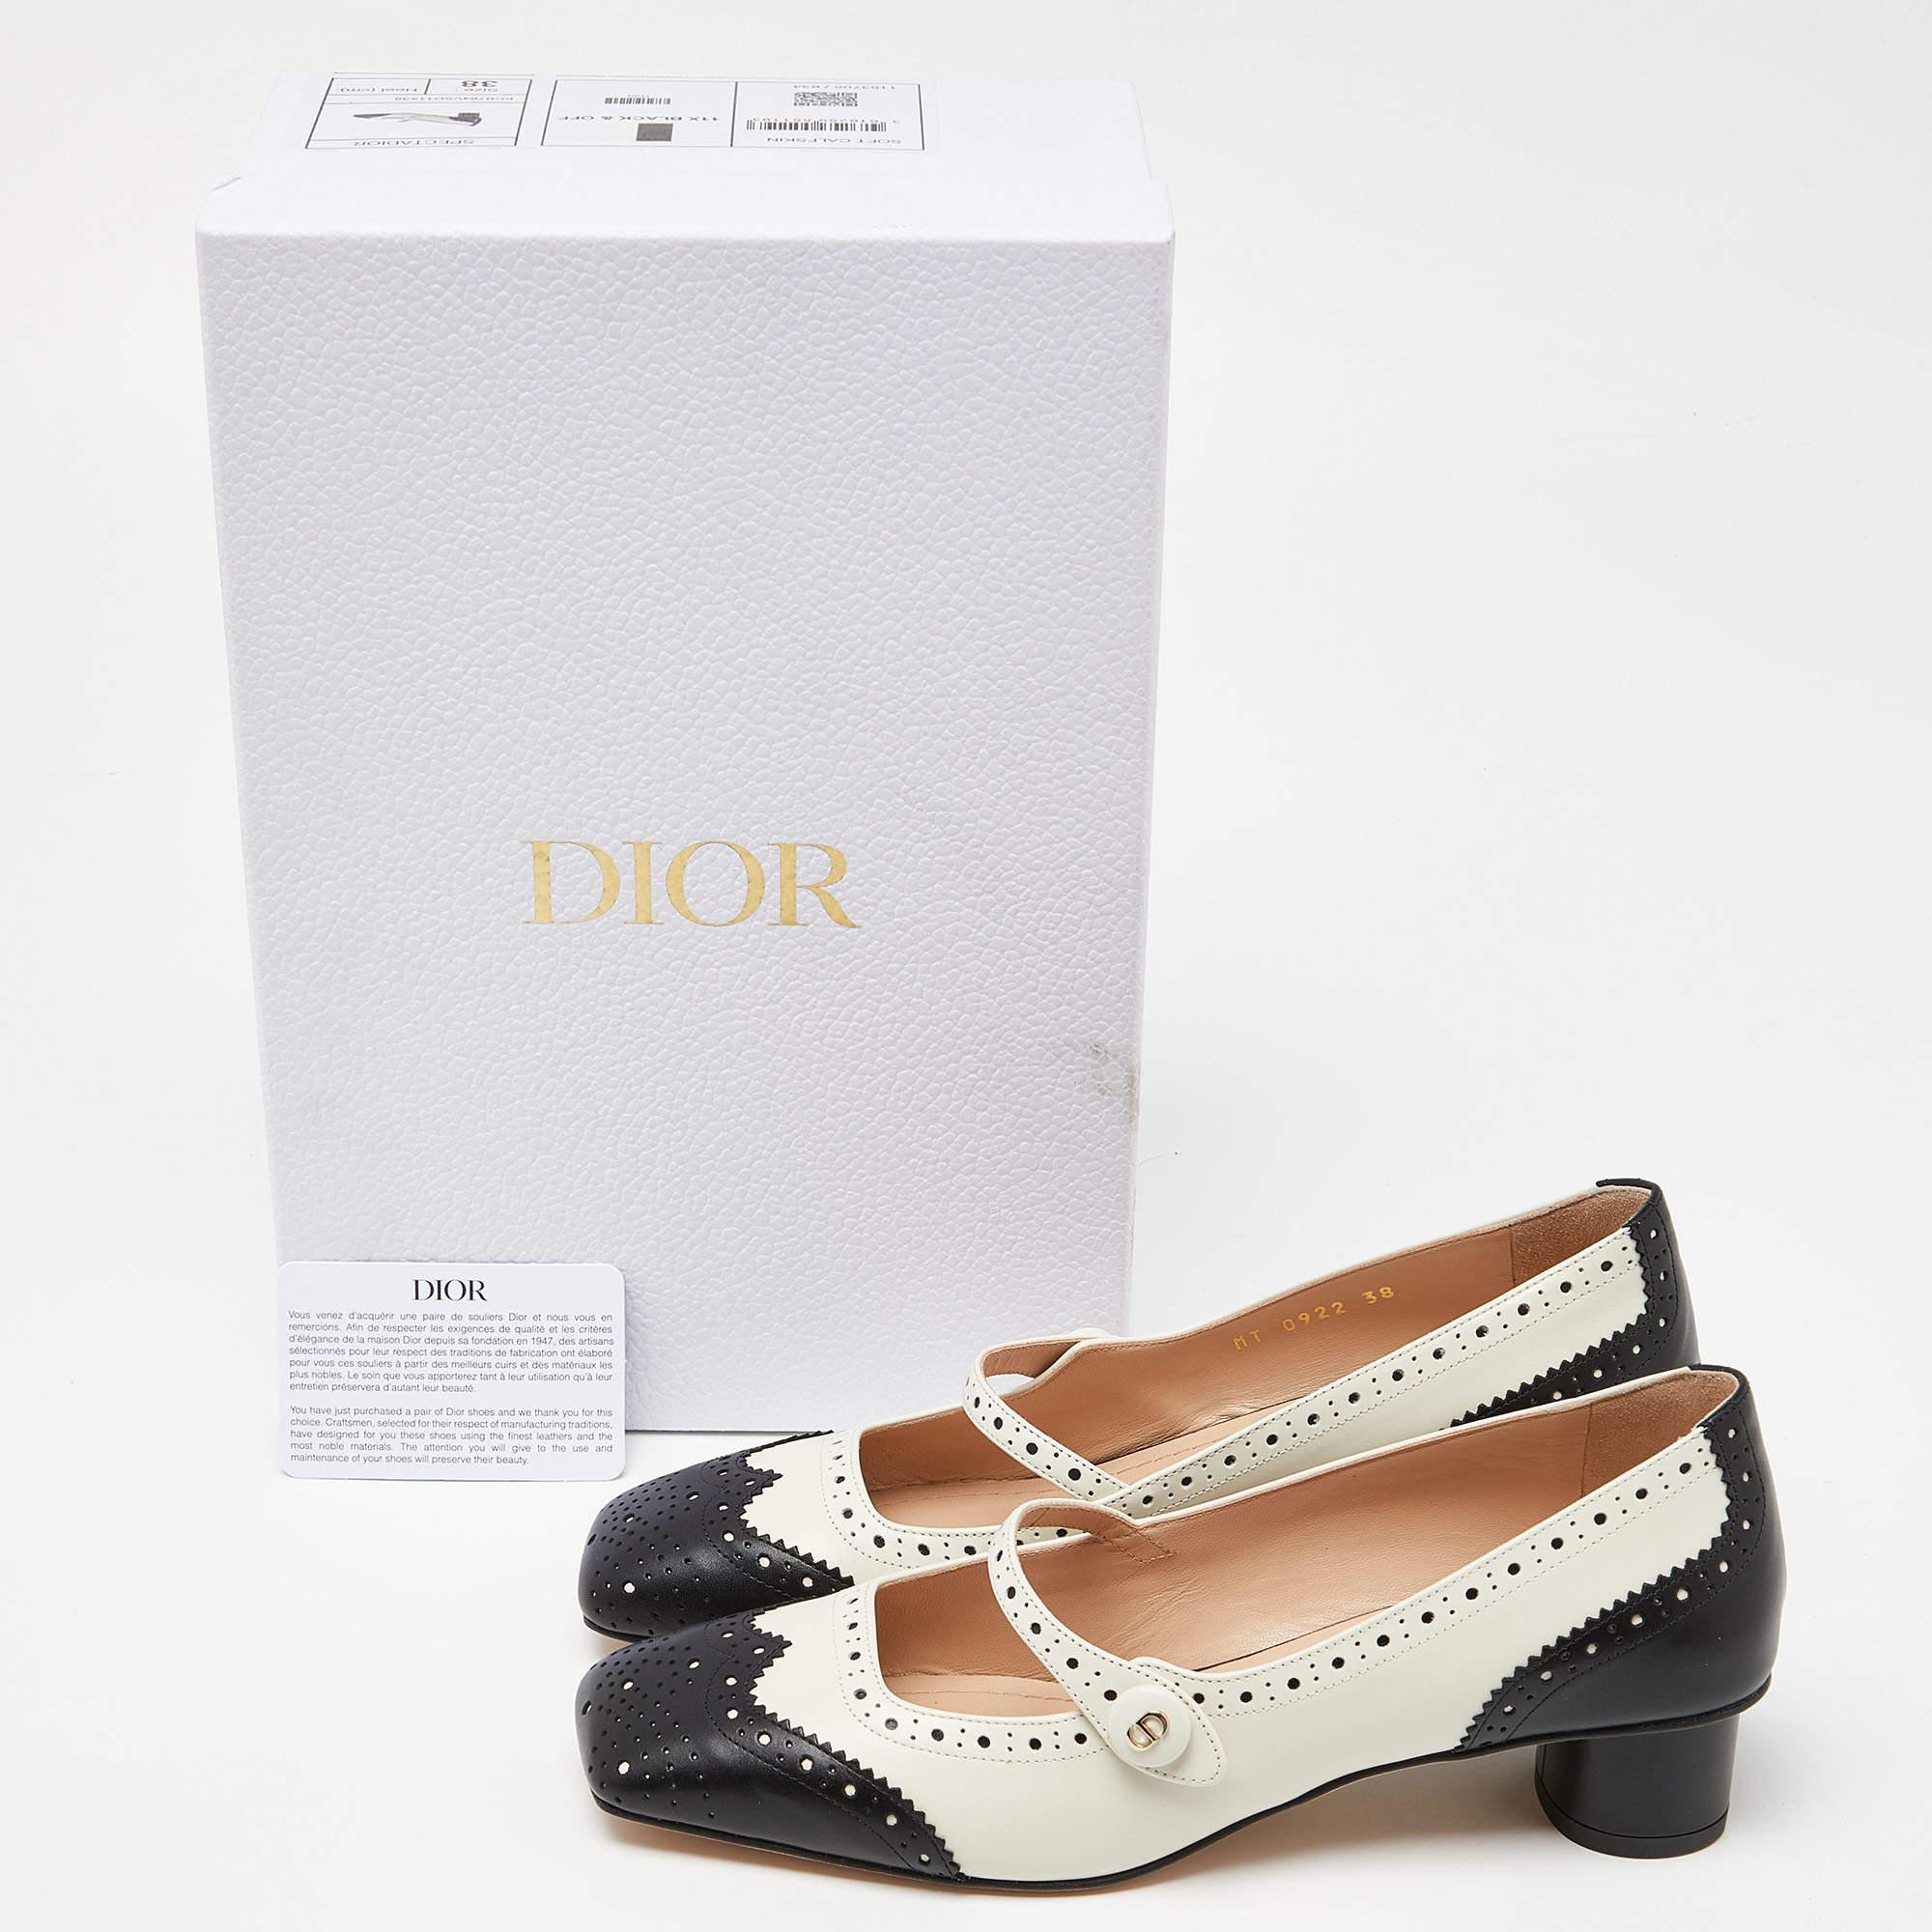 Dior Black/Cream Leather Mary Jane Pumps Size 38 5